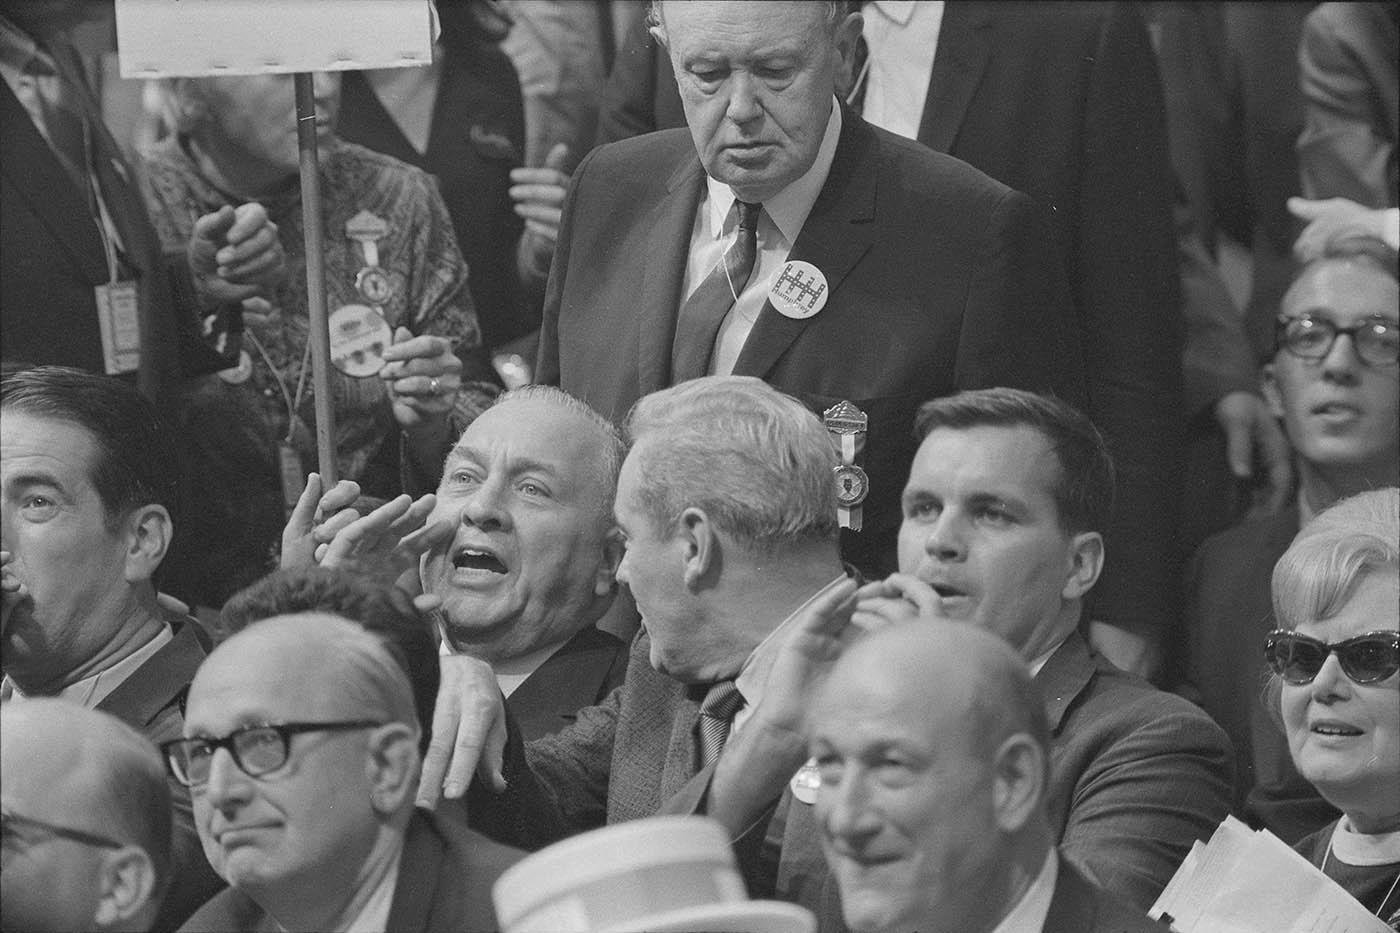 Mayor Richard J. Daley reacts to Senator Abraham Ribicoff's denunciation of Chicago Police Tactics at the 1968 Democratic National Convention. Daley's son, Richard M. Daley, sits to the right. Photo: Warren K. Leffler